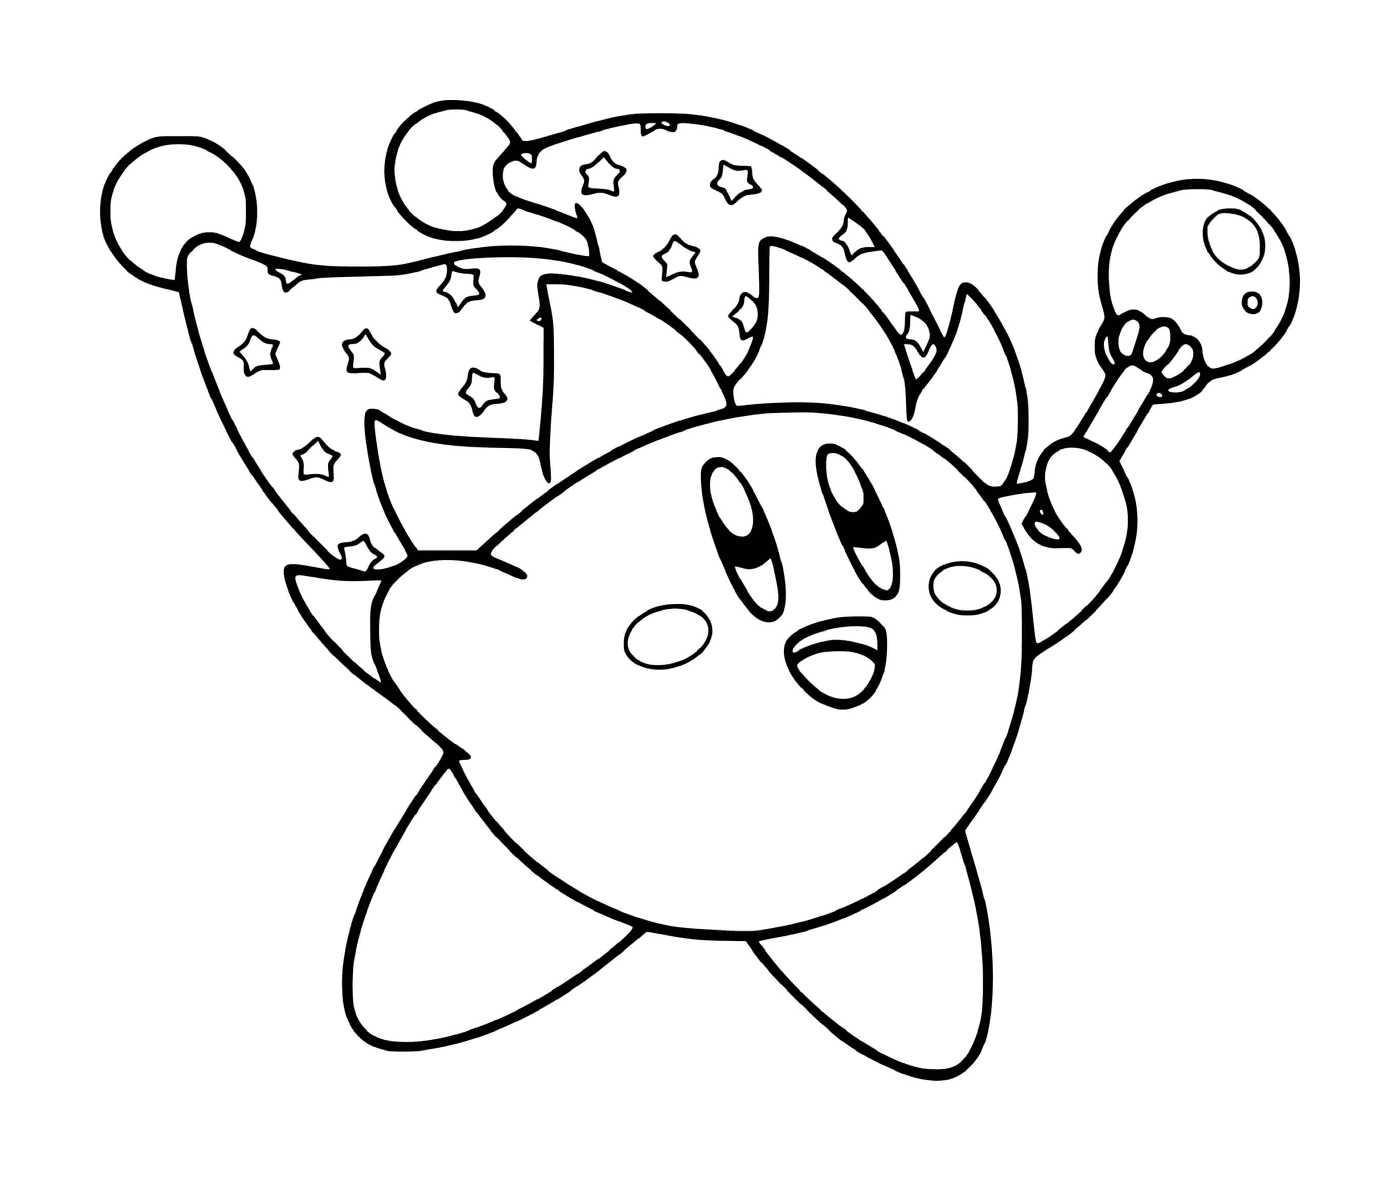  Kirby the magician of Nintendo 